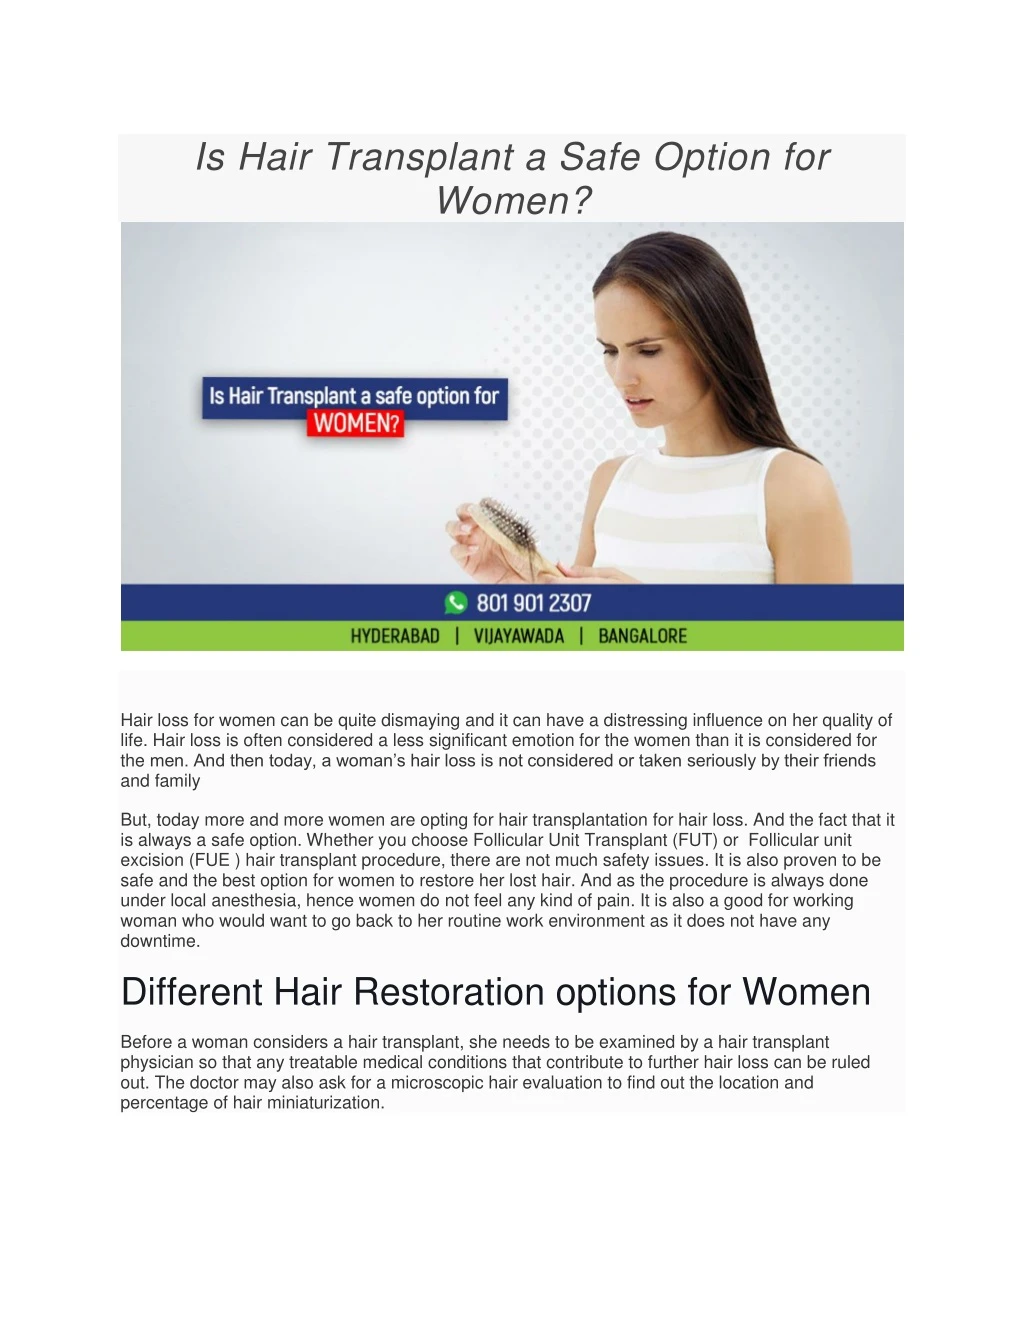 is hair transplant a safe option for women